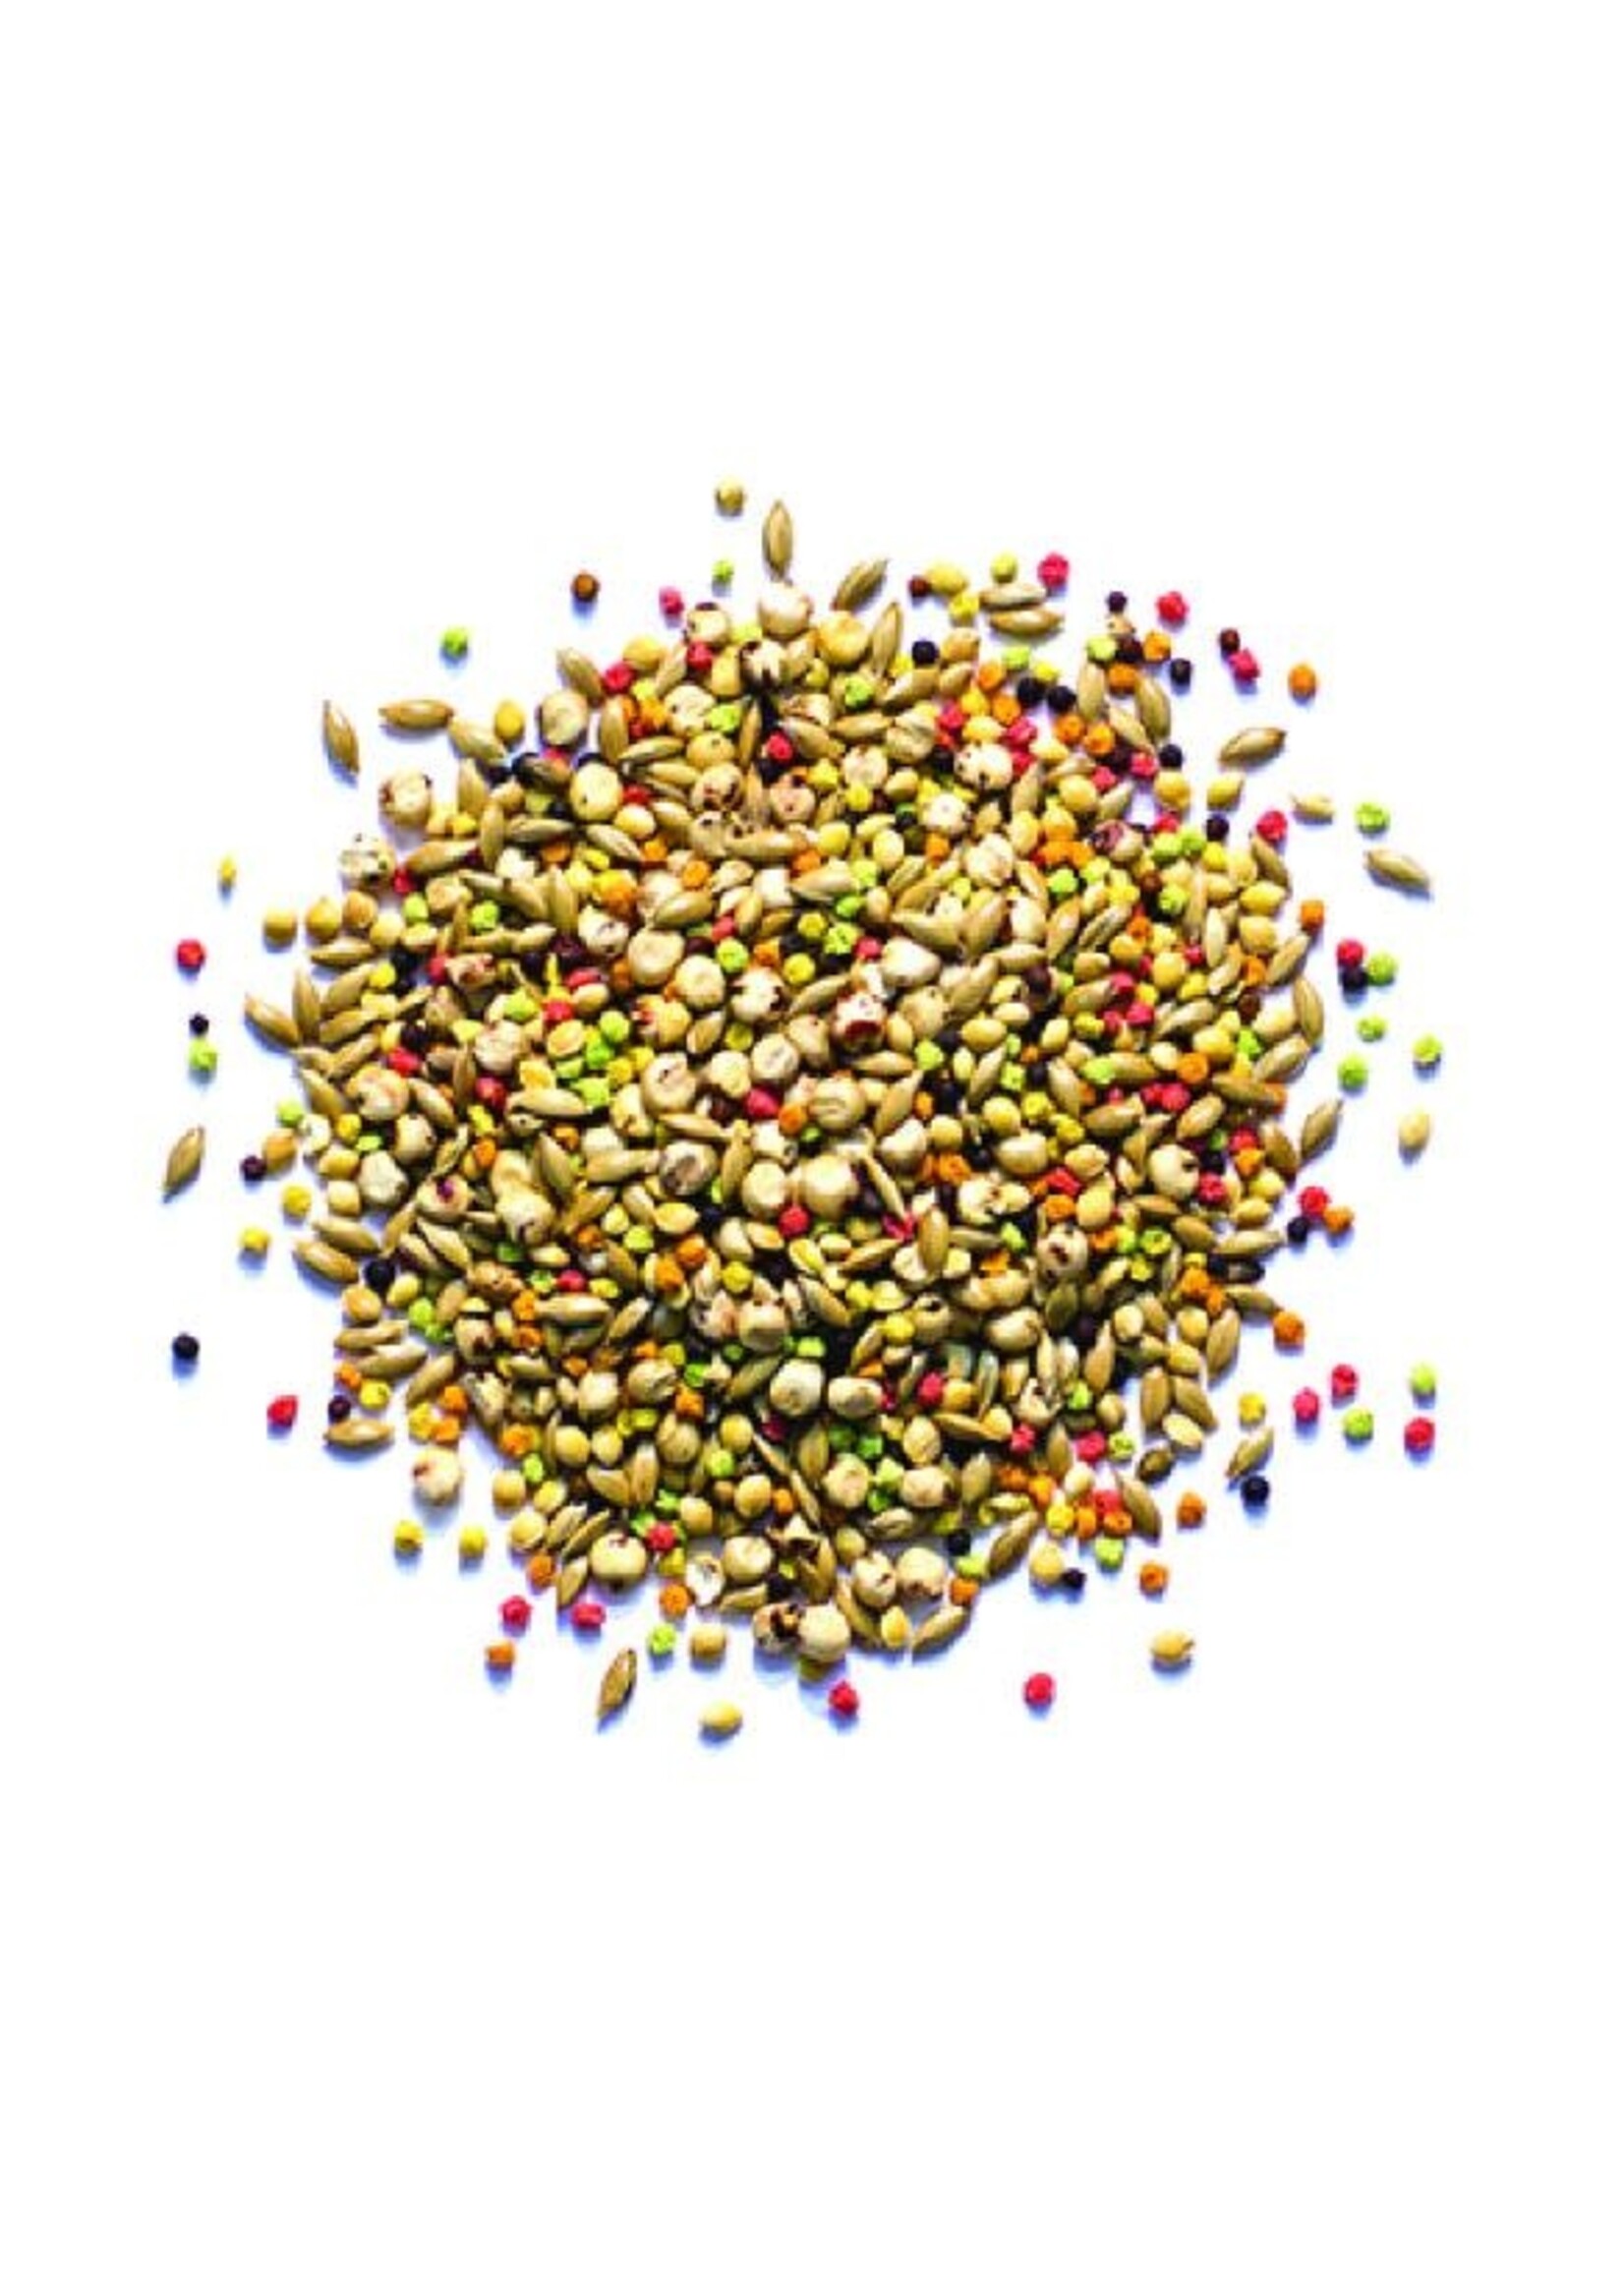 Zupreem ZuPreem "Sensible Seed" Food For Parakeet, Budgies, Parrotlet & Small Birds 2lbs 45020